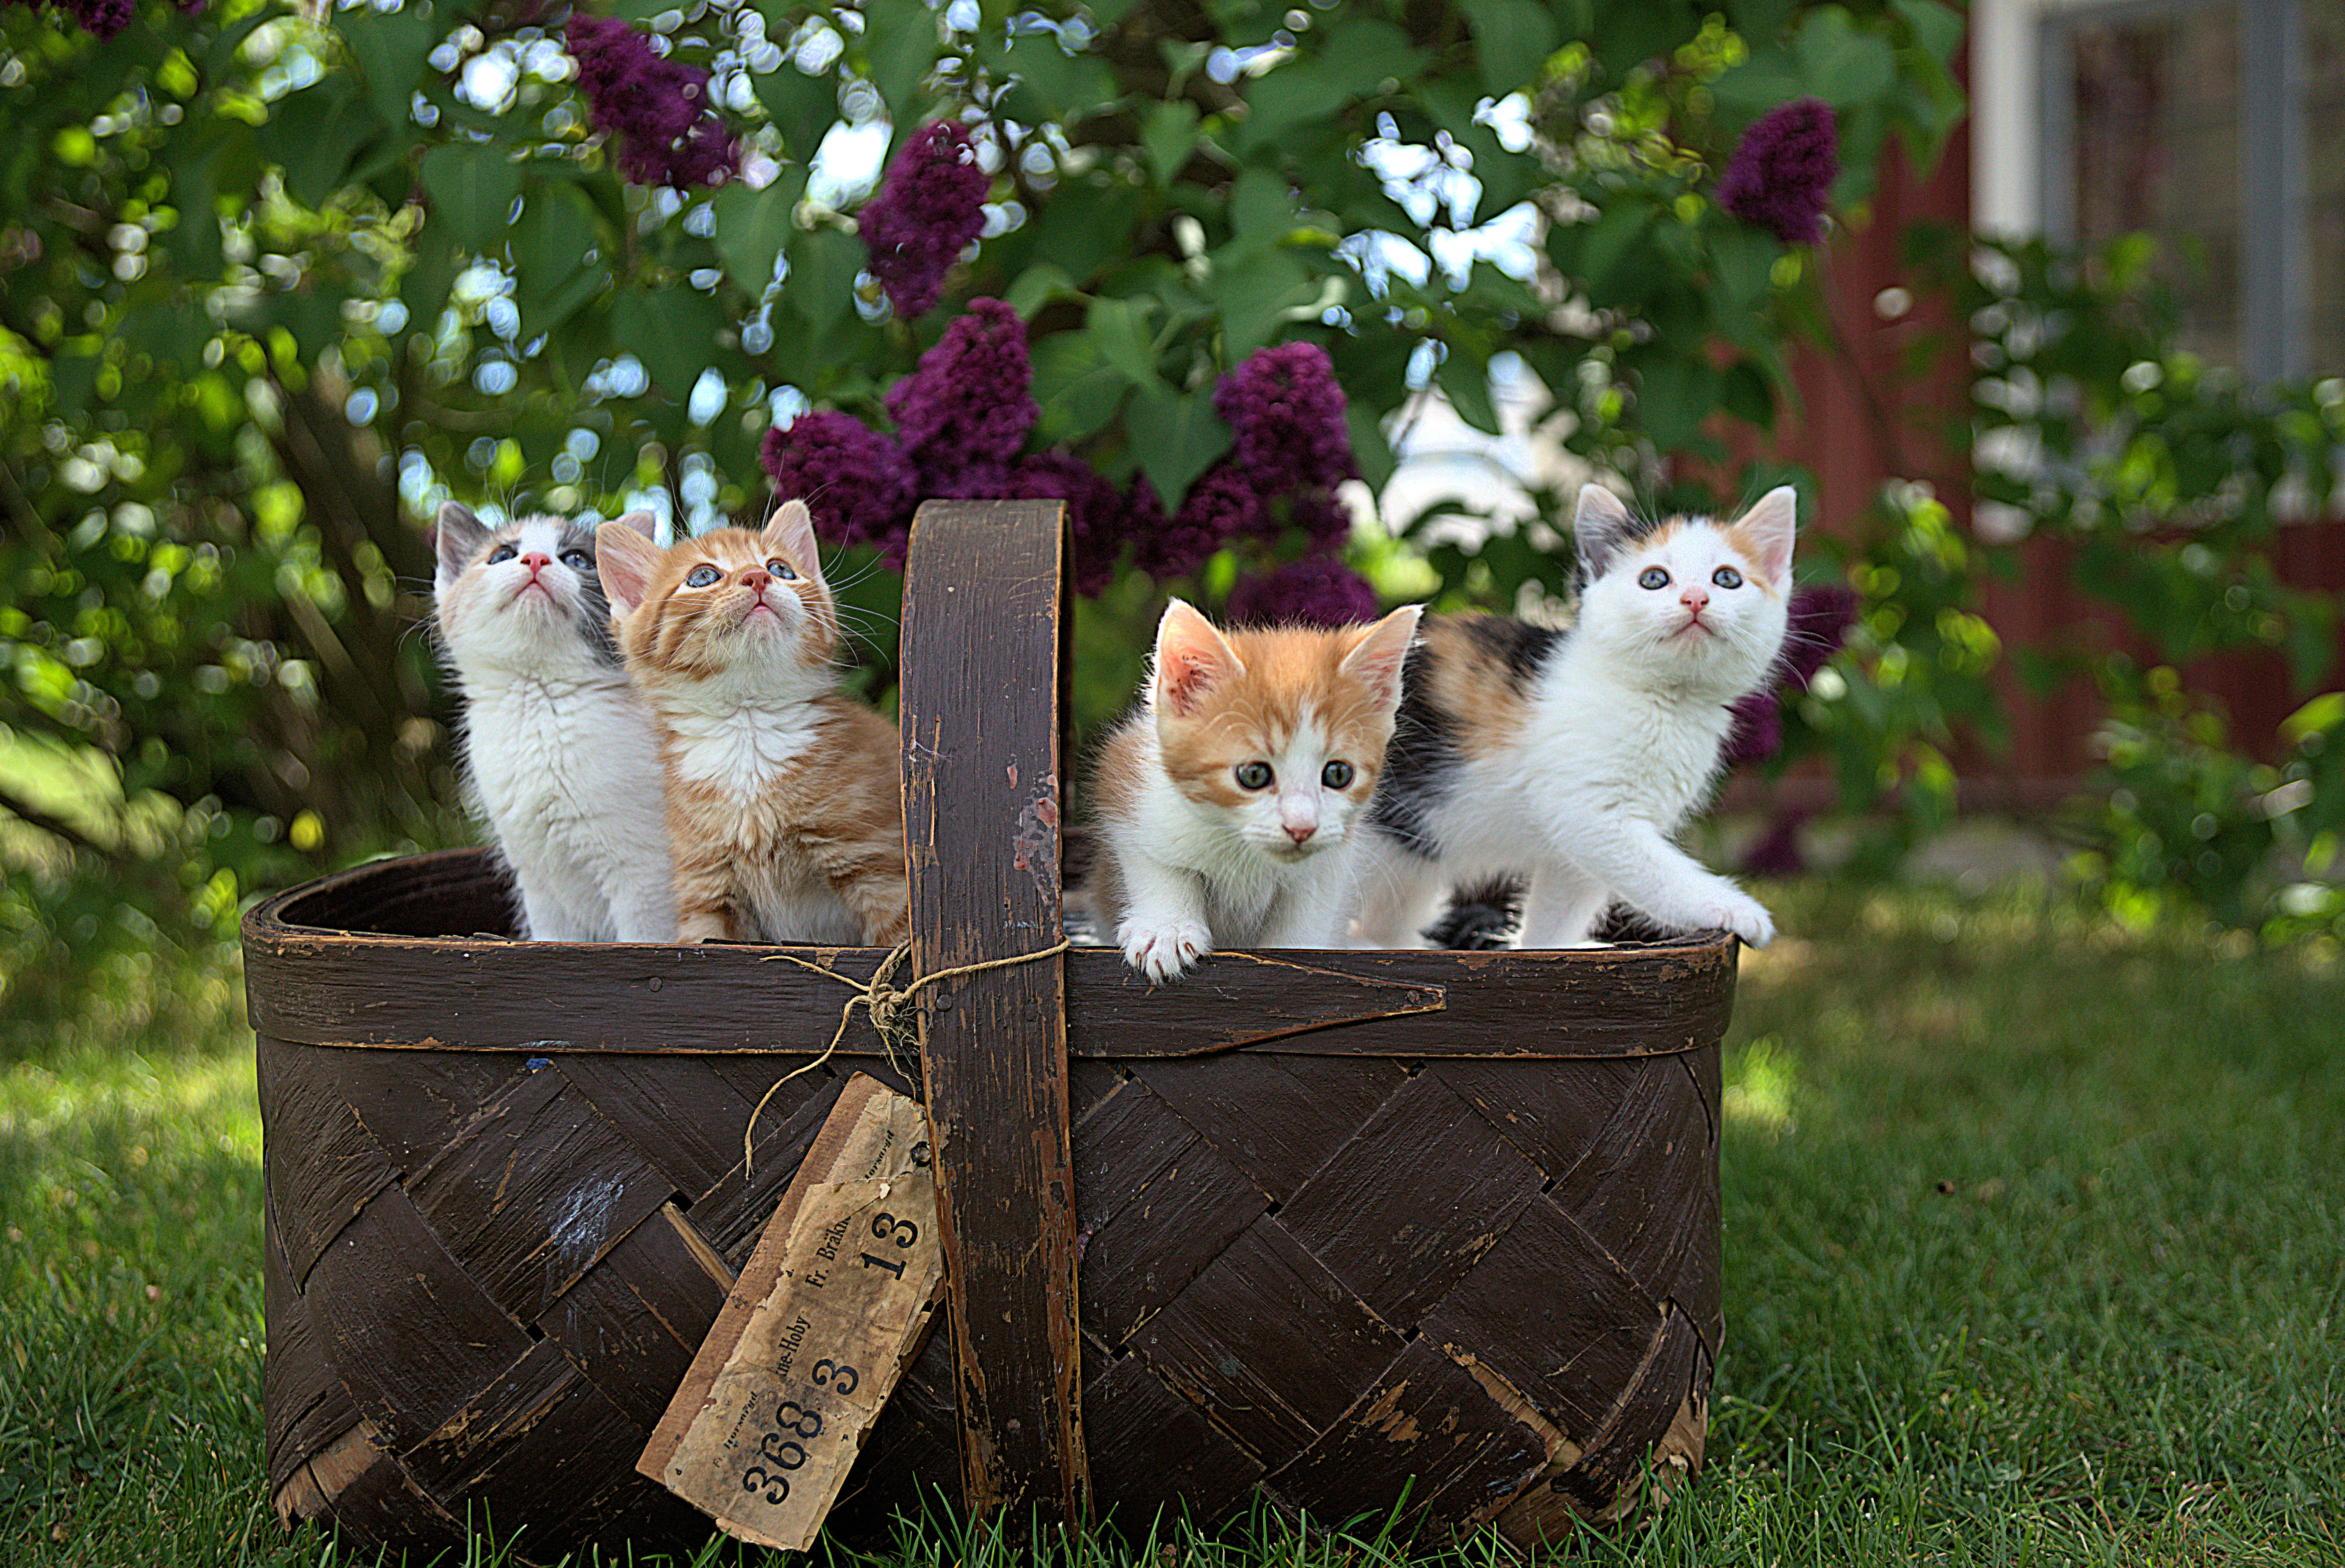 Kittens in basket, showing how following up with leads can often feel like herding cats.